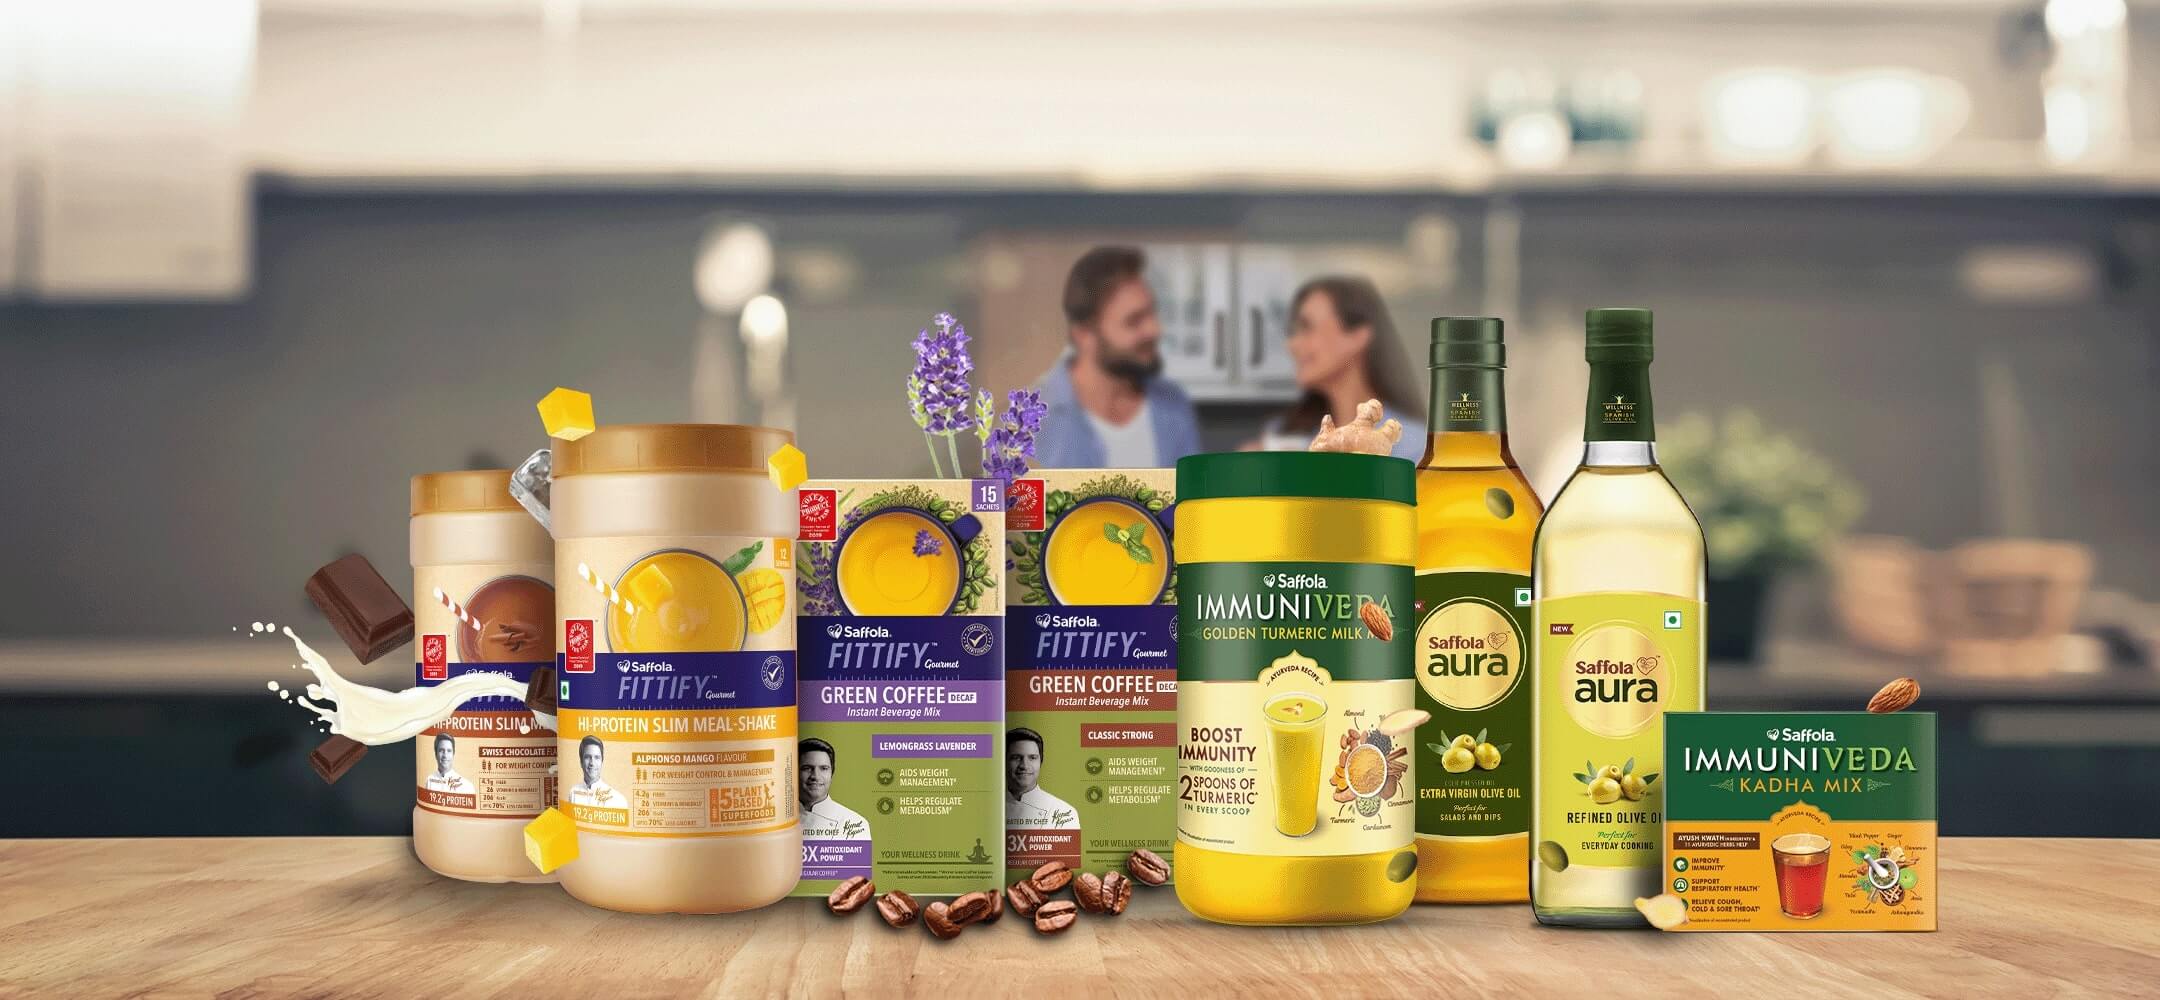 saffola-fittify-products-banner